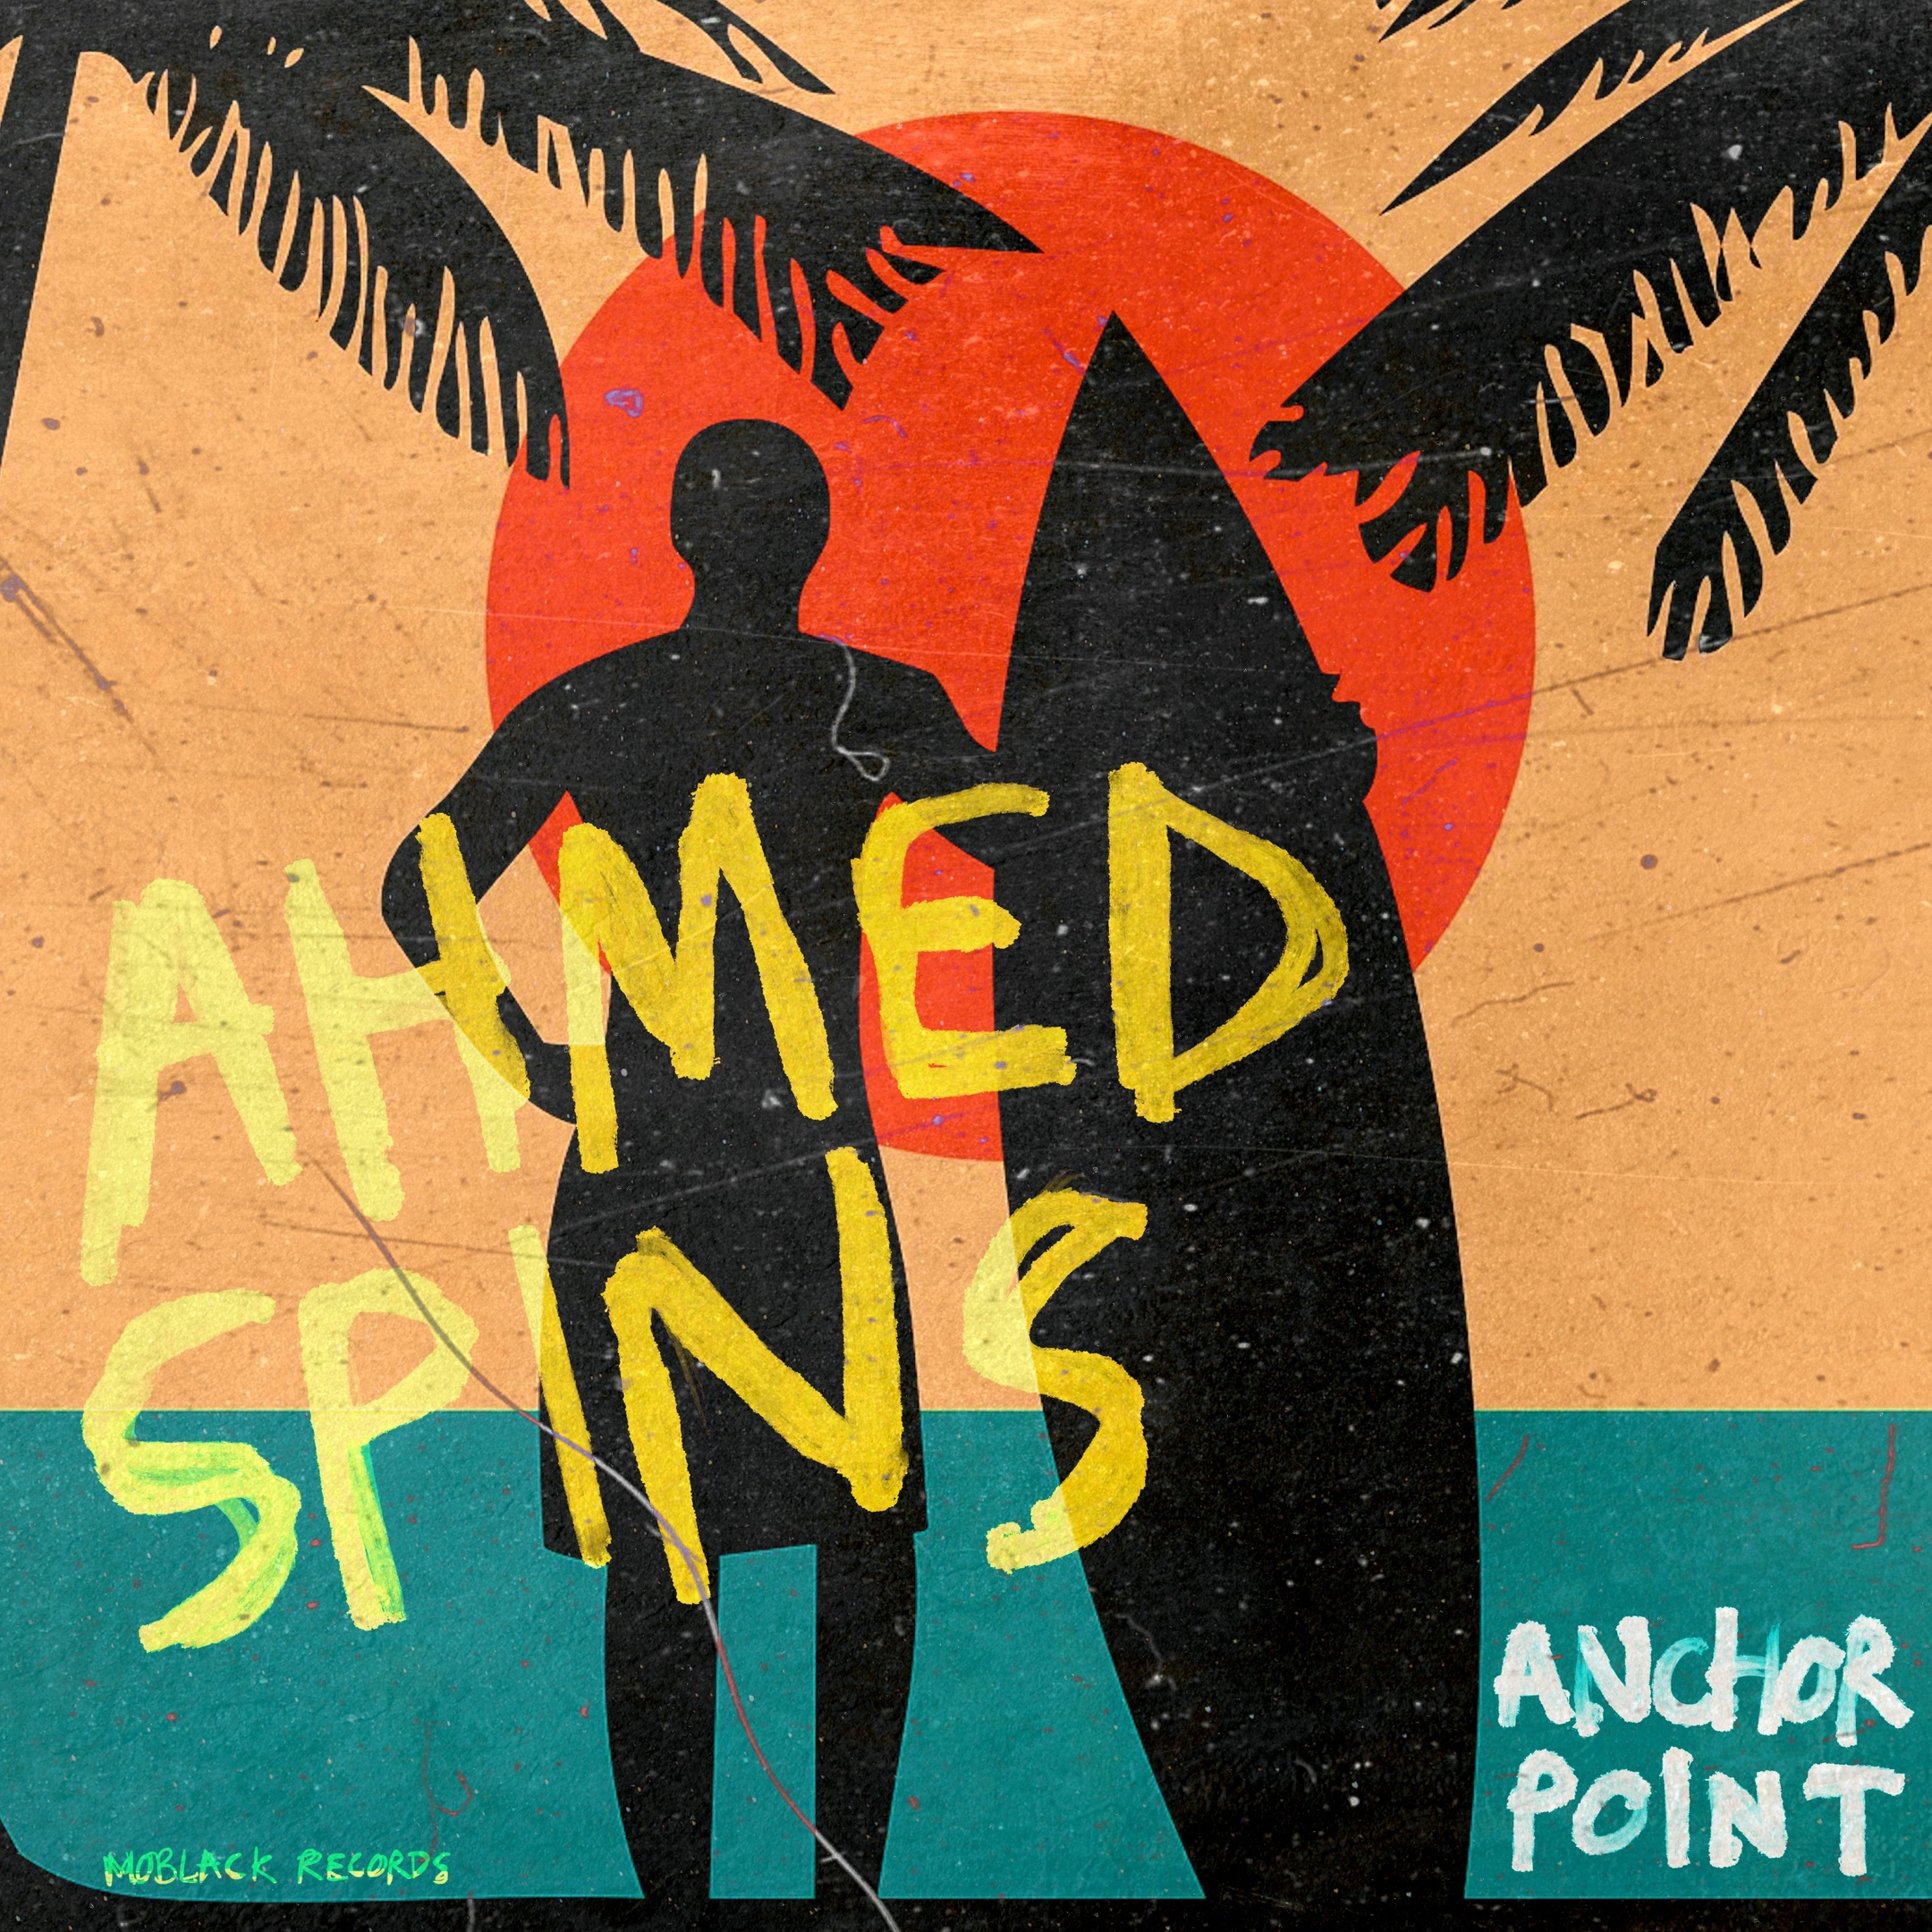 Spinning waves. Ahmed Spins. Anchor point Ahmed Spins. Ahmed Spins feat Stevo Atambire Anchor. Waves & WAVS (feat. Lizwi) от Ahmed Spins.